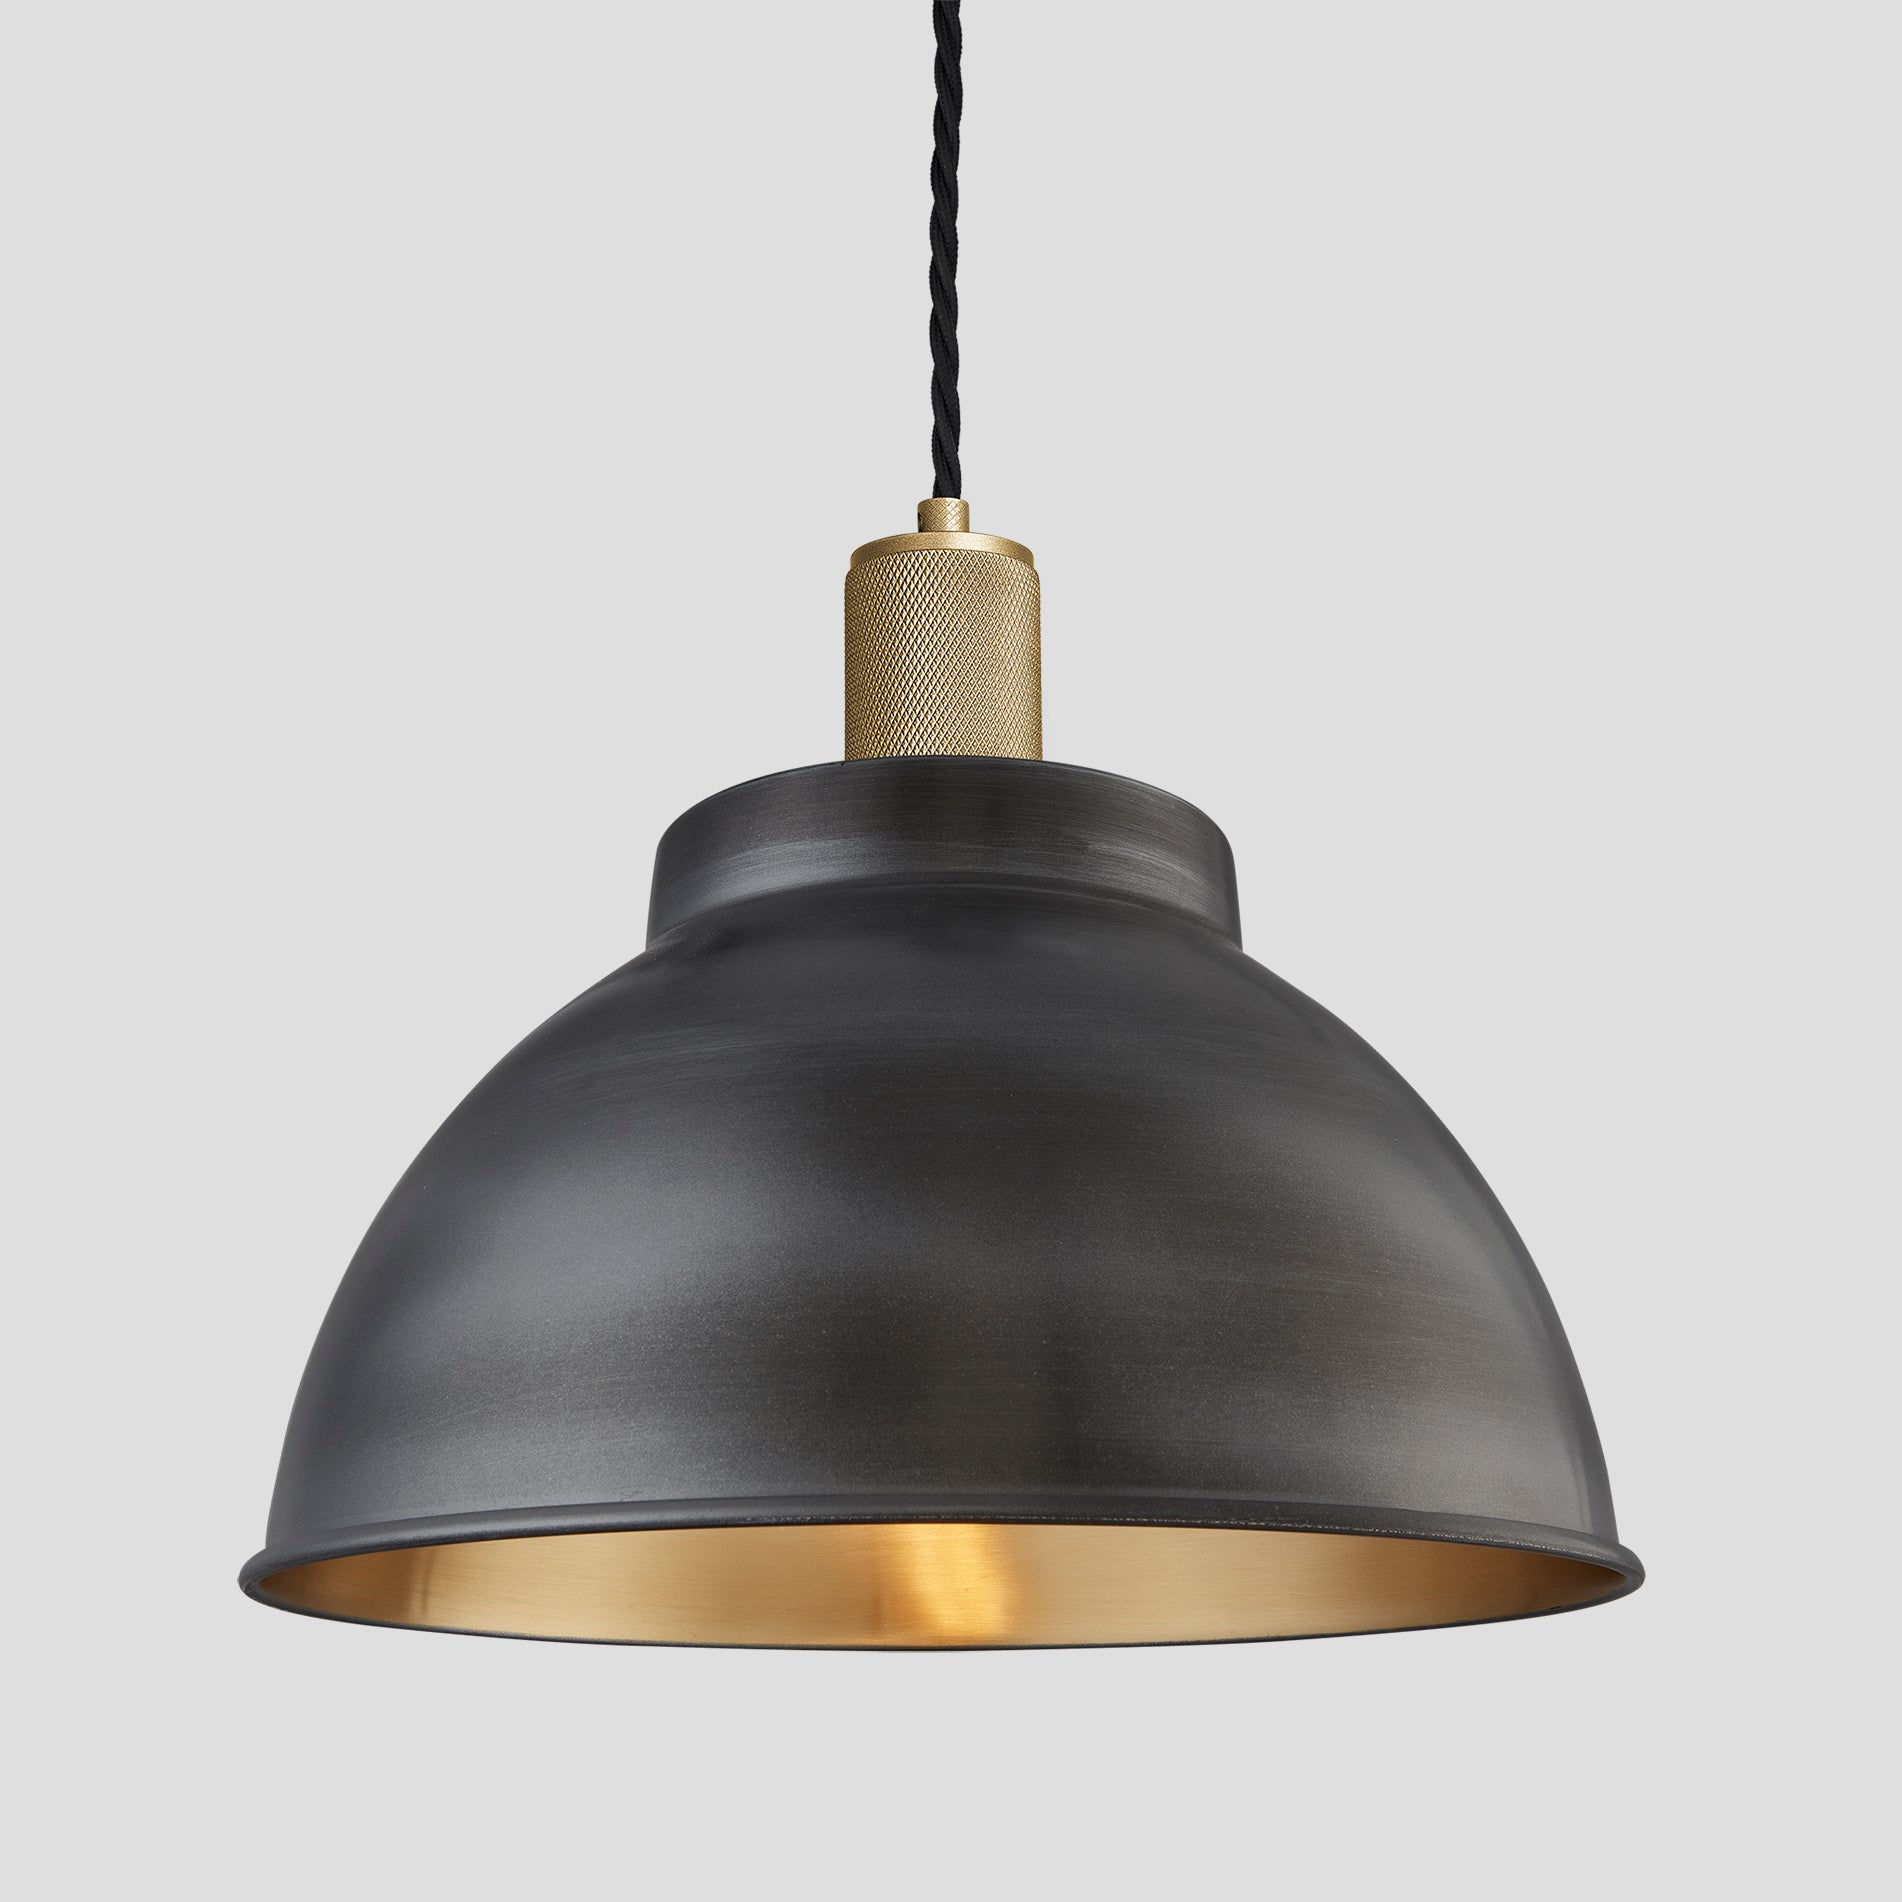 Knurled Dome Pendant - 13 Inch - Pewter & Brass Industville KN-DP13-BP-BH